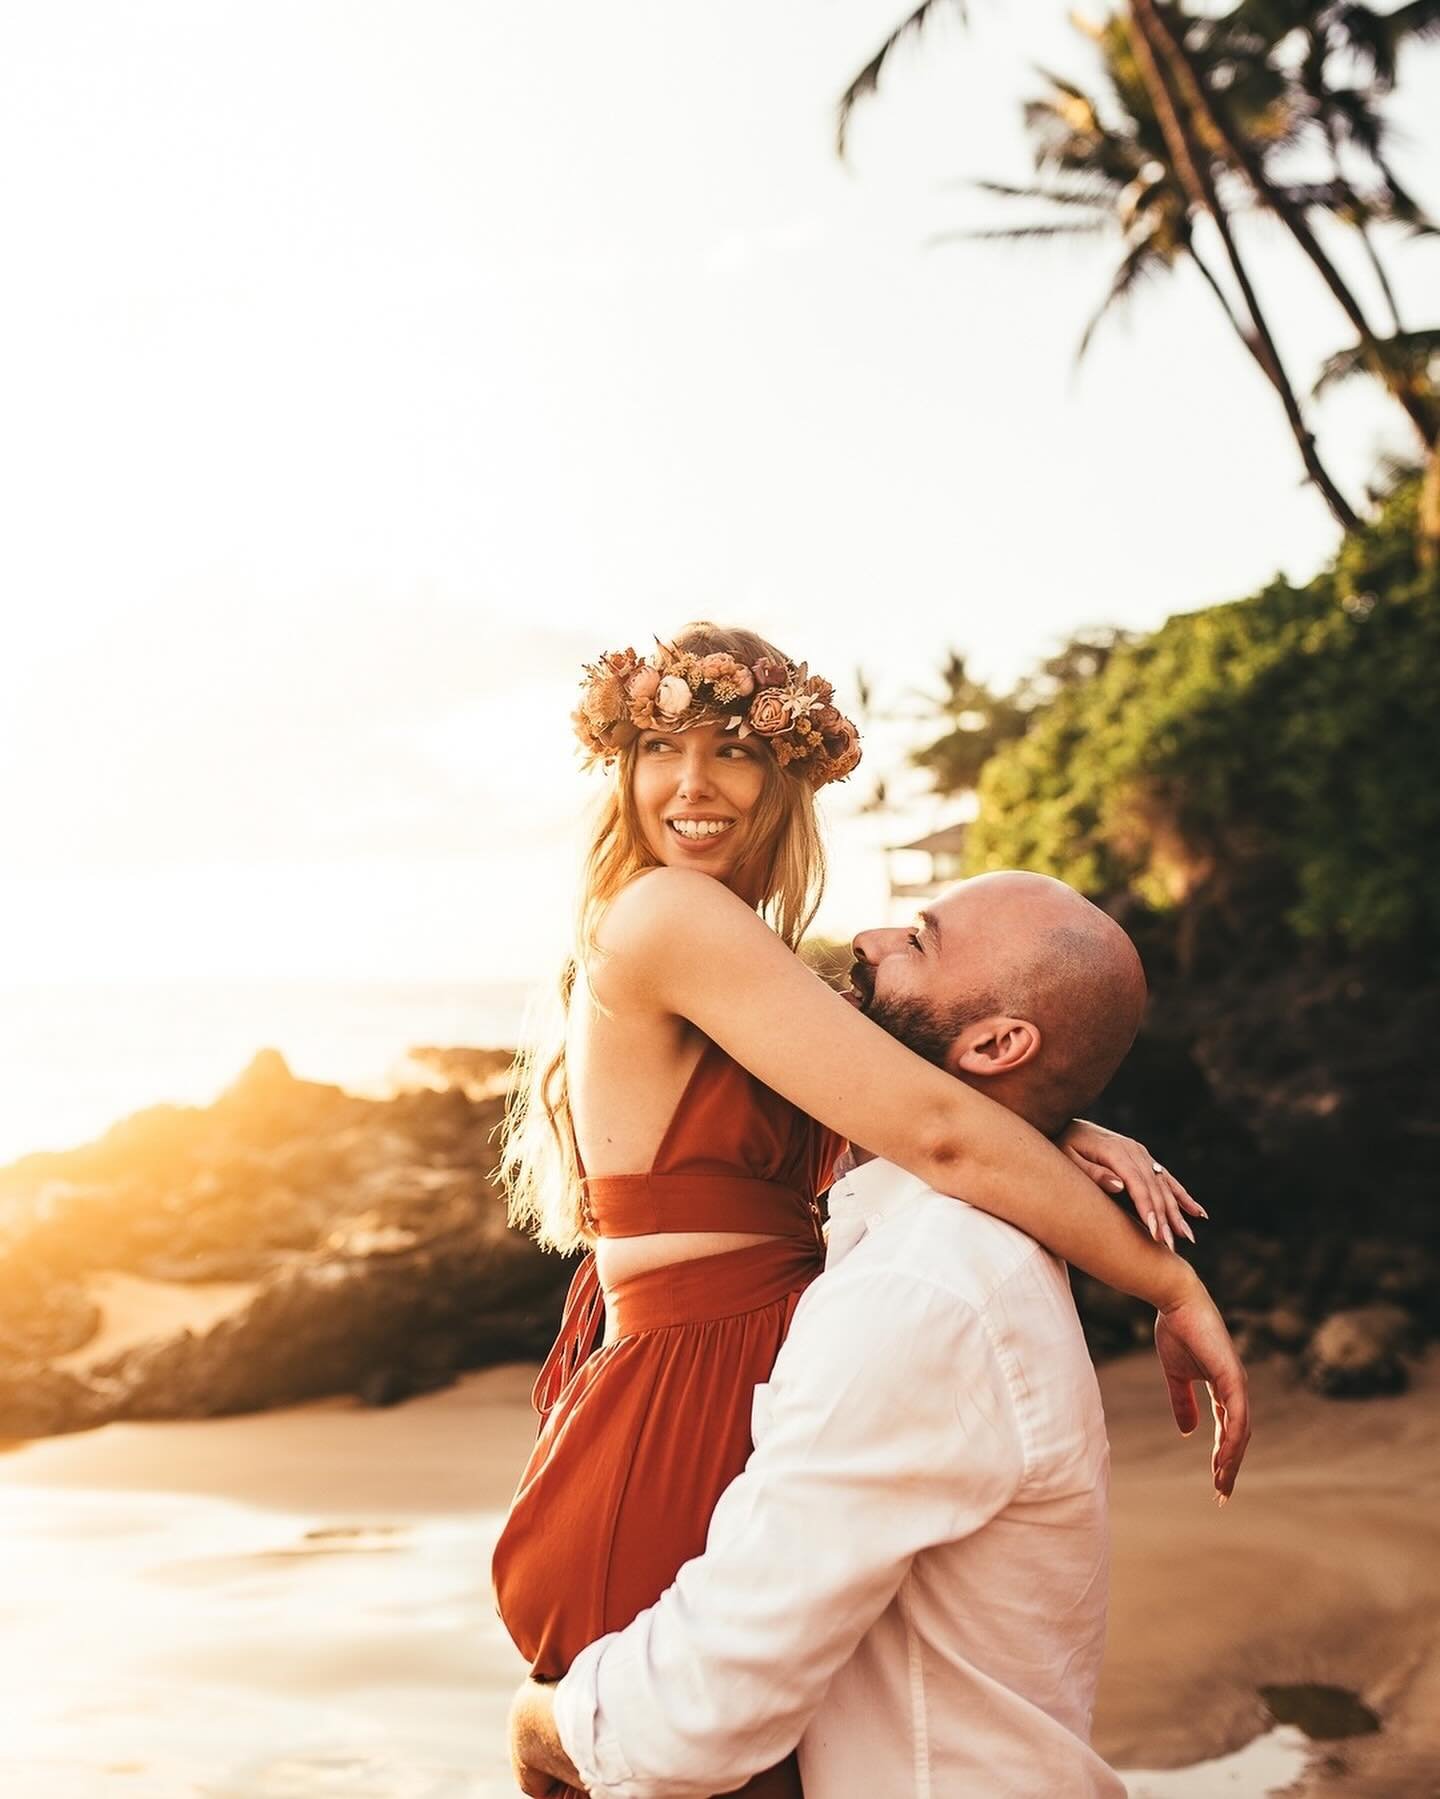 The most joyful &amp; radiant engagement session ever - thanks for bringing a lil piece of NH to Maui to help me feel back at home you guys! xo